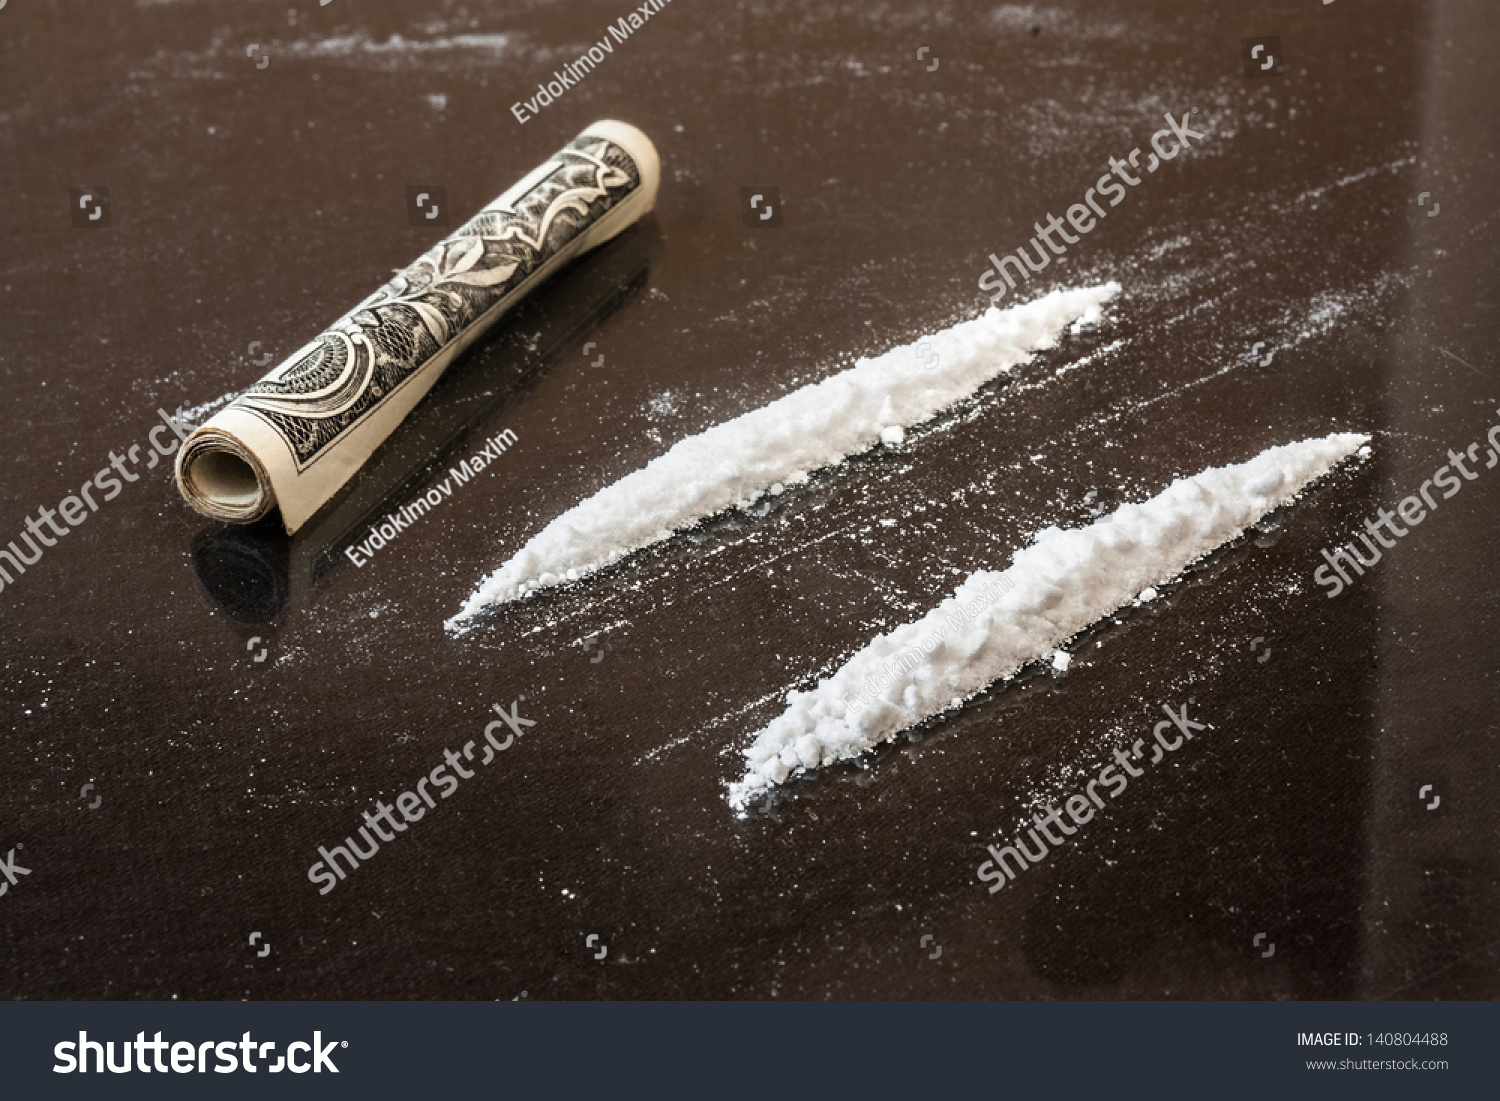 stock-photo-two-line-of-cocaine-beside-a-wrapped-up-dollar-bill-credit-card-140804488.jpg